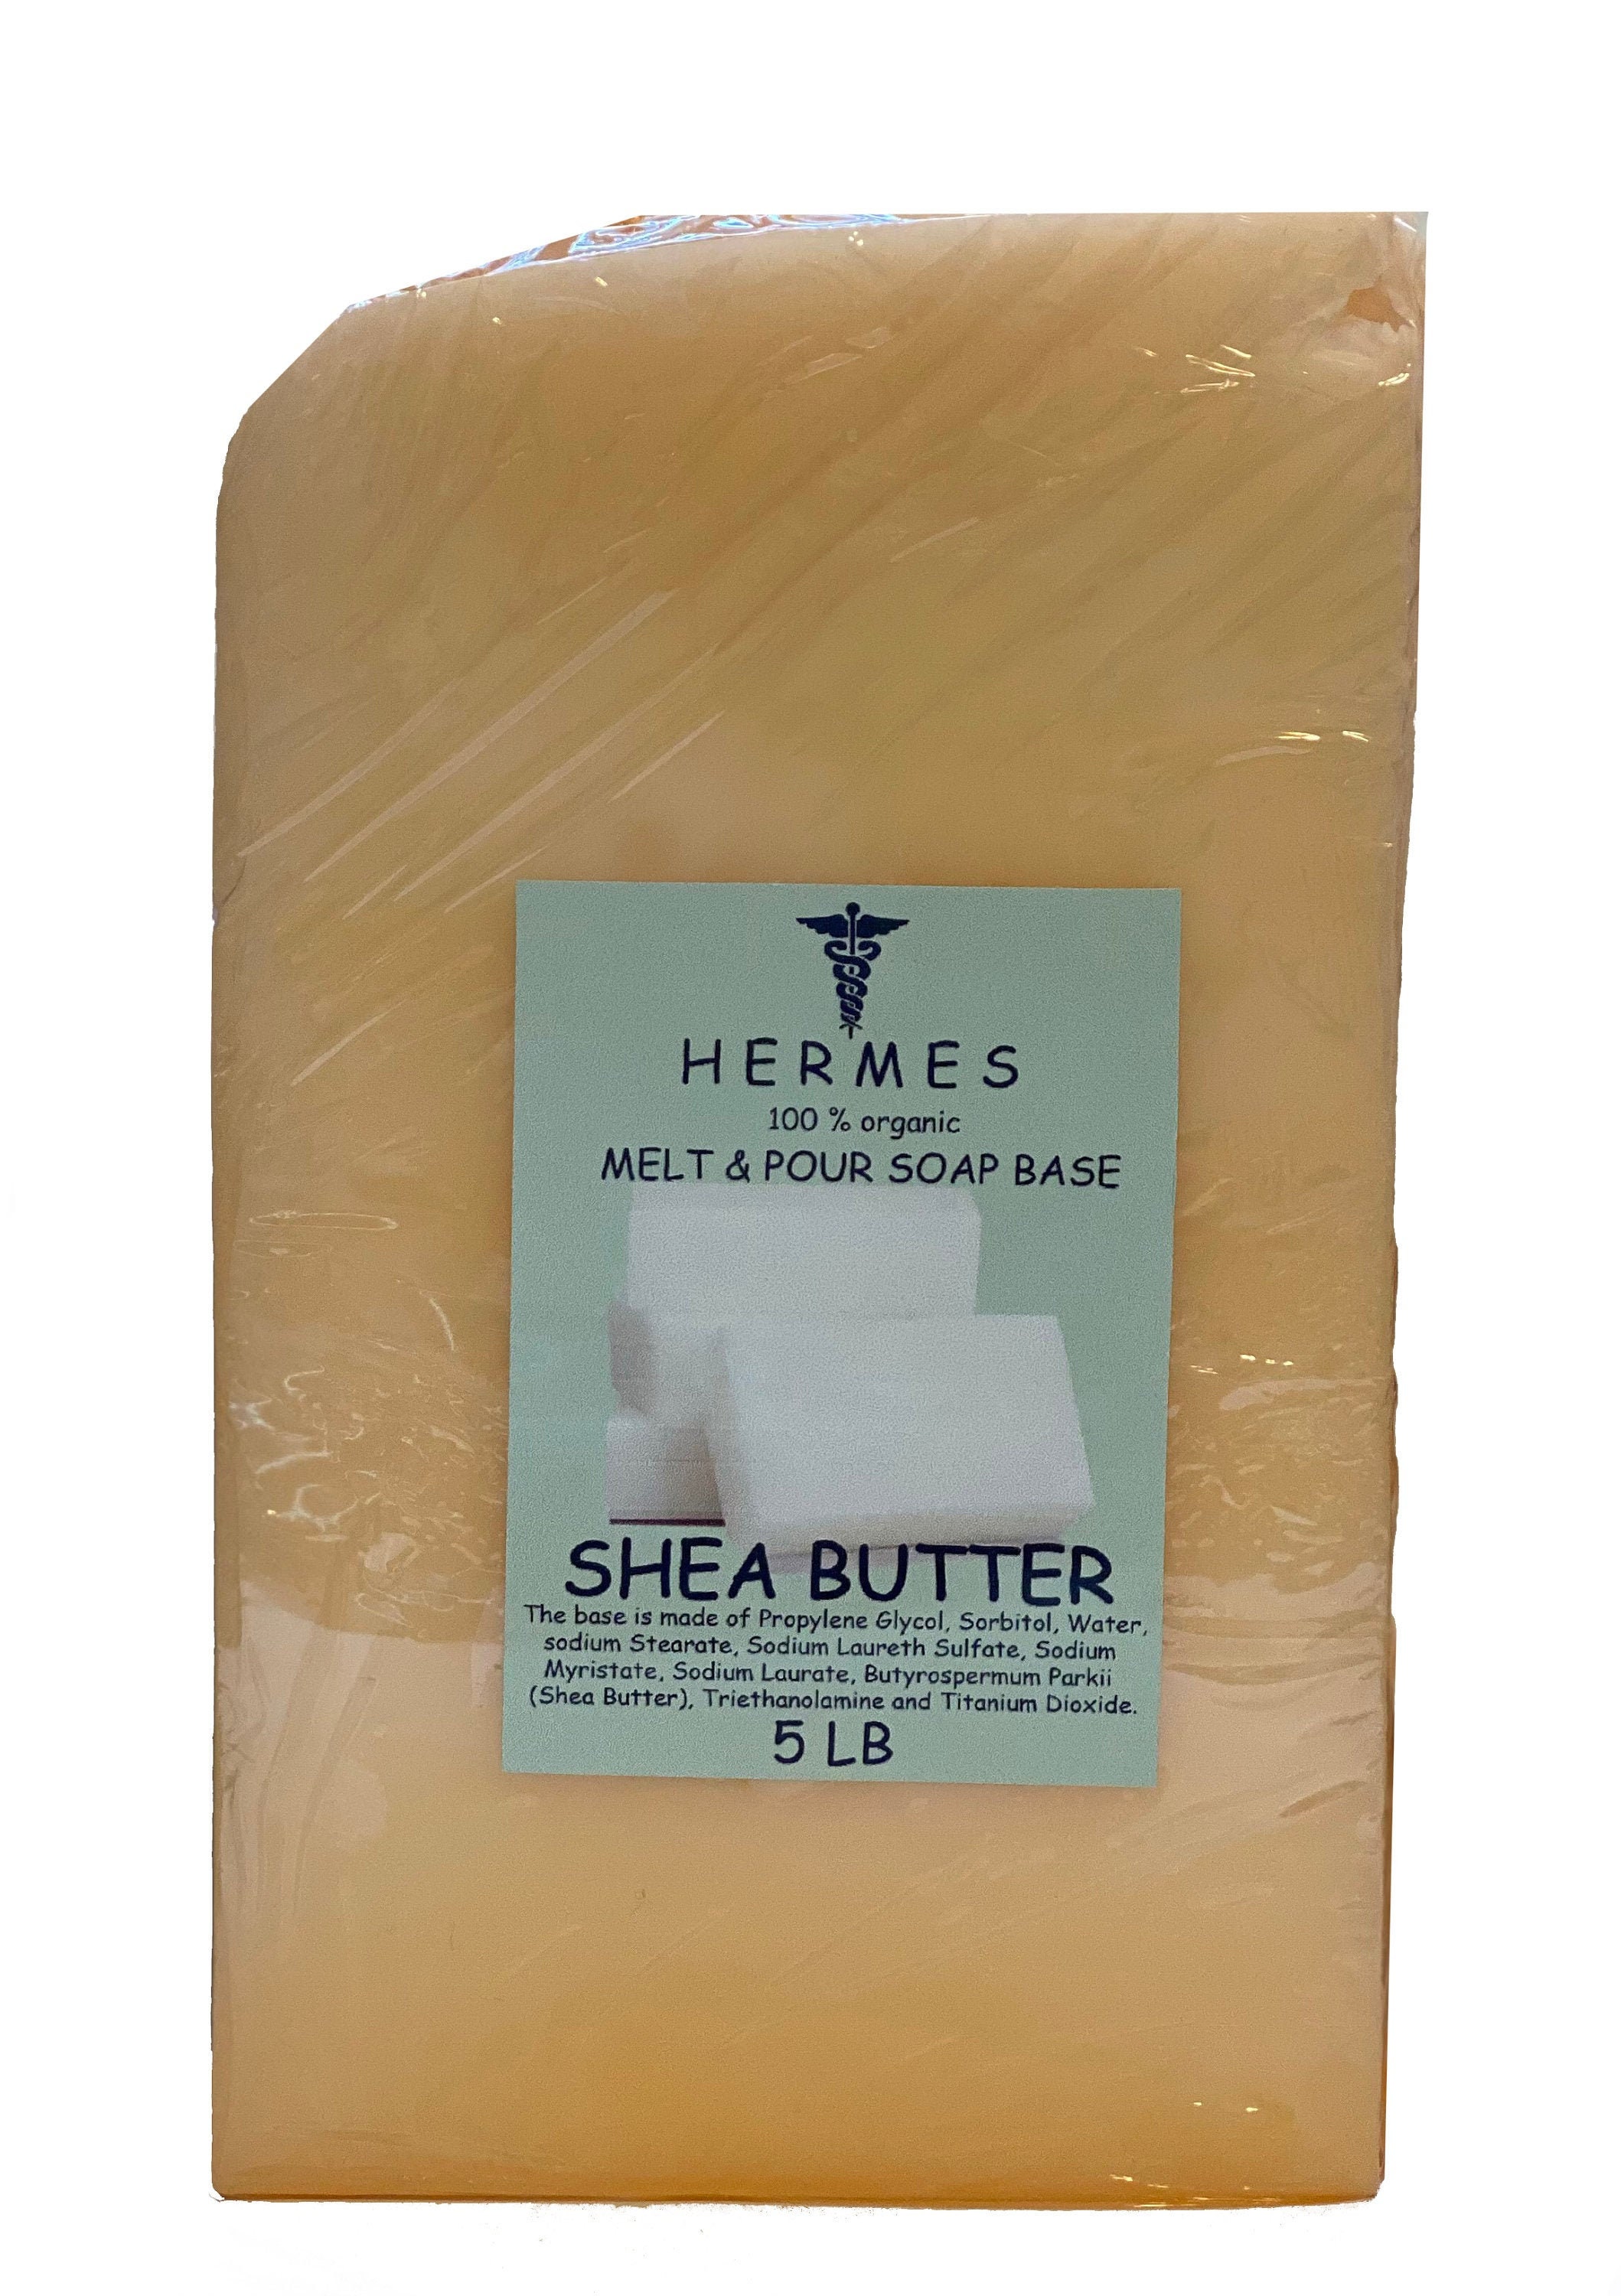 Shea Butter Soap Base Melt and Pour Cutting Soap 